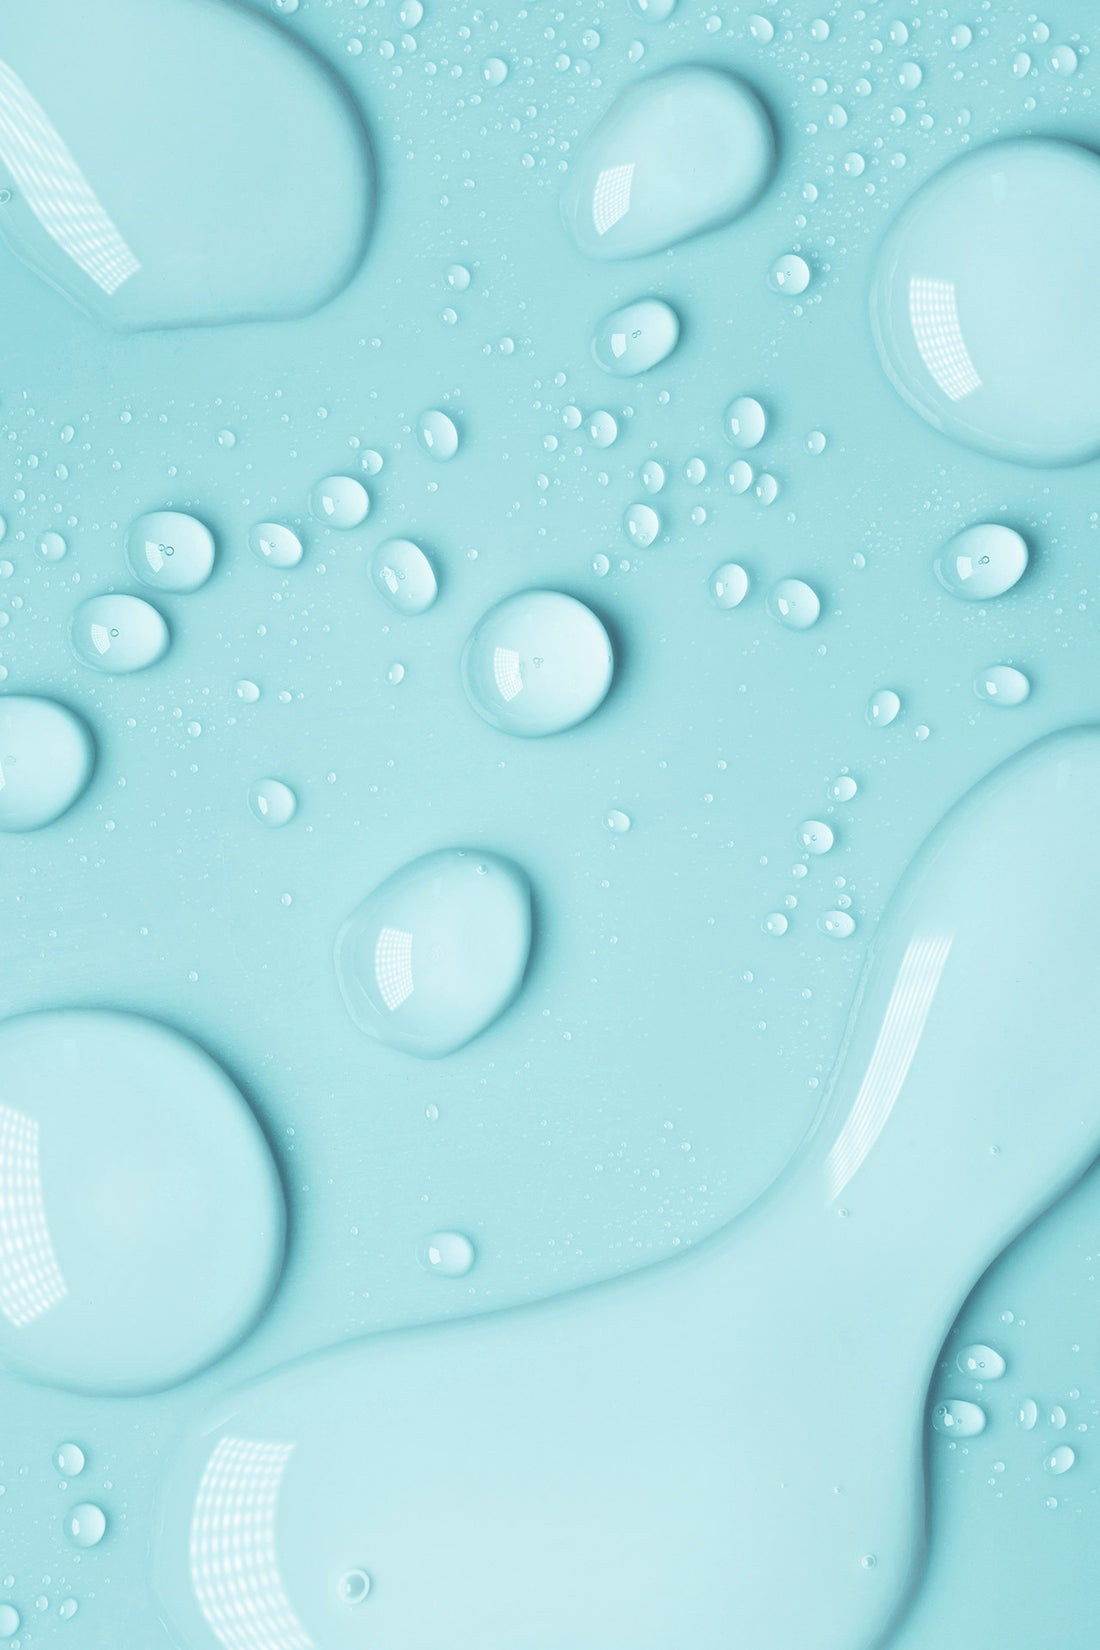 fresh water drops on a soft blue background